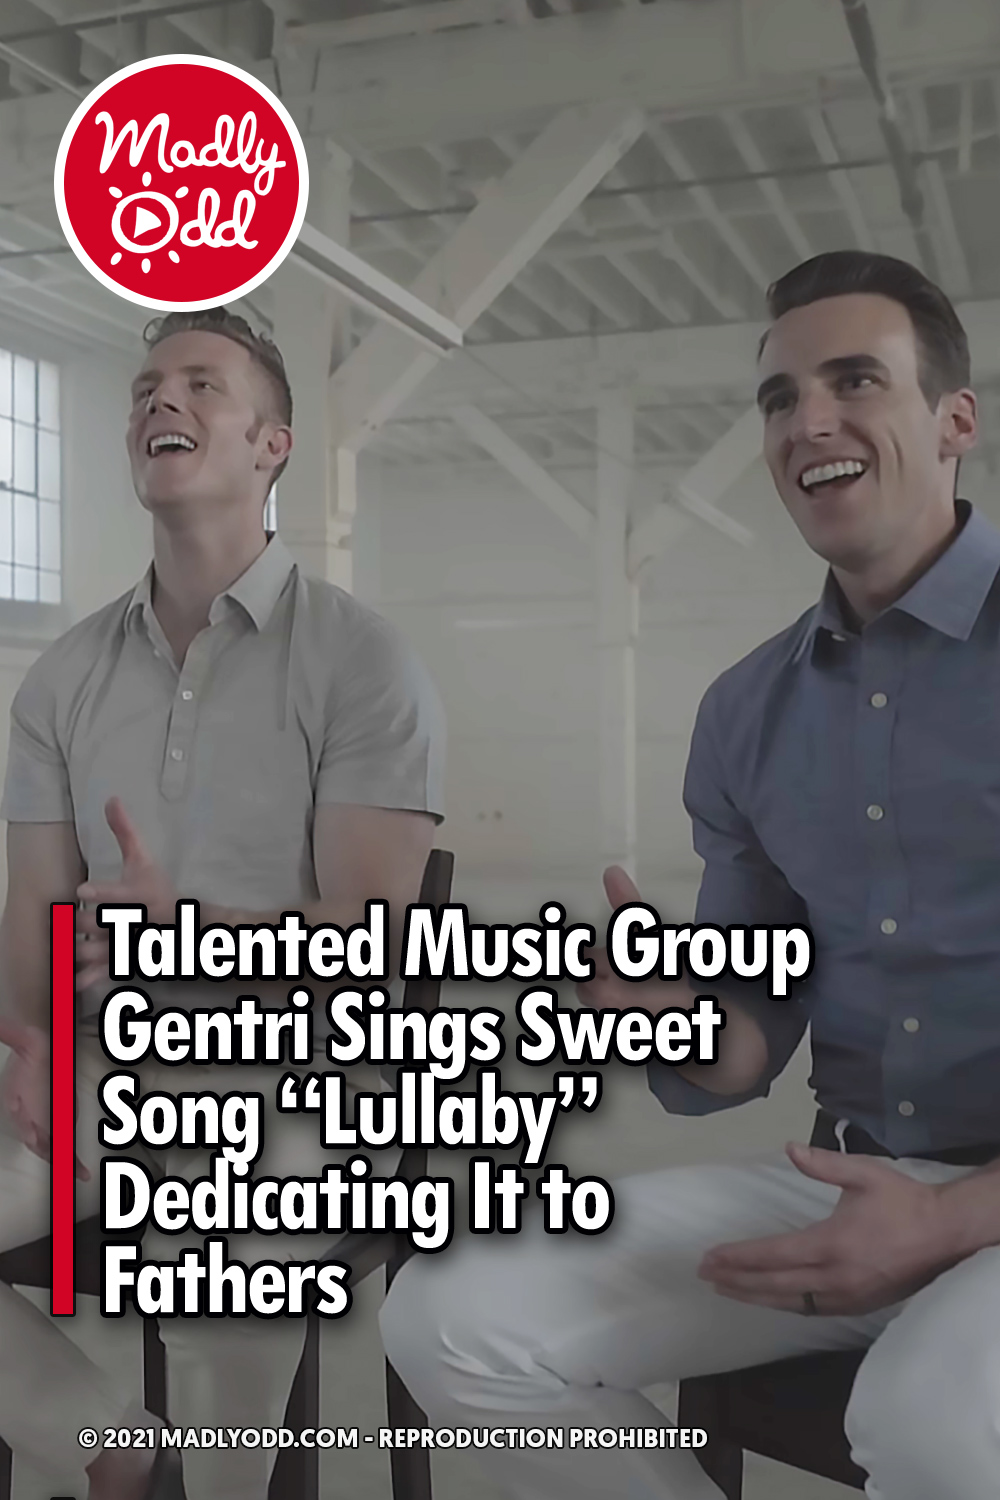 Talented Music Group Gentri Sings Sweet Song “Lullaby” Dedicating It to Fathers